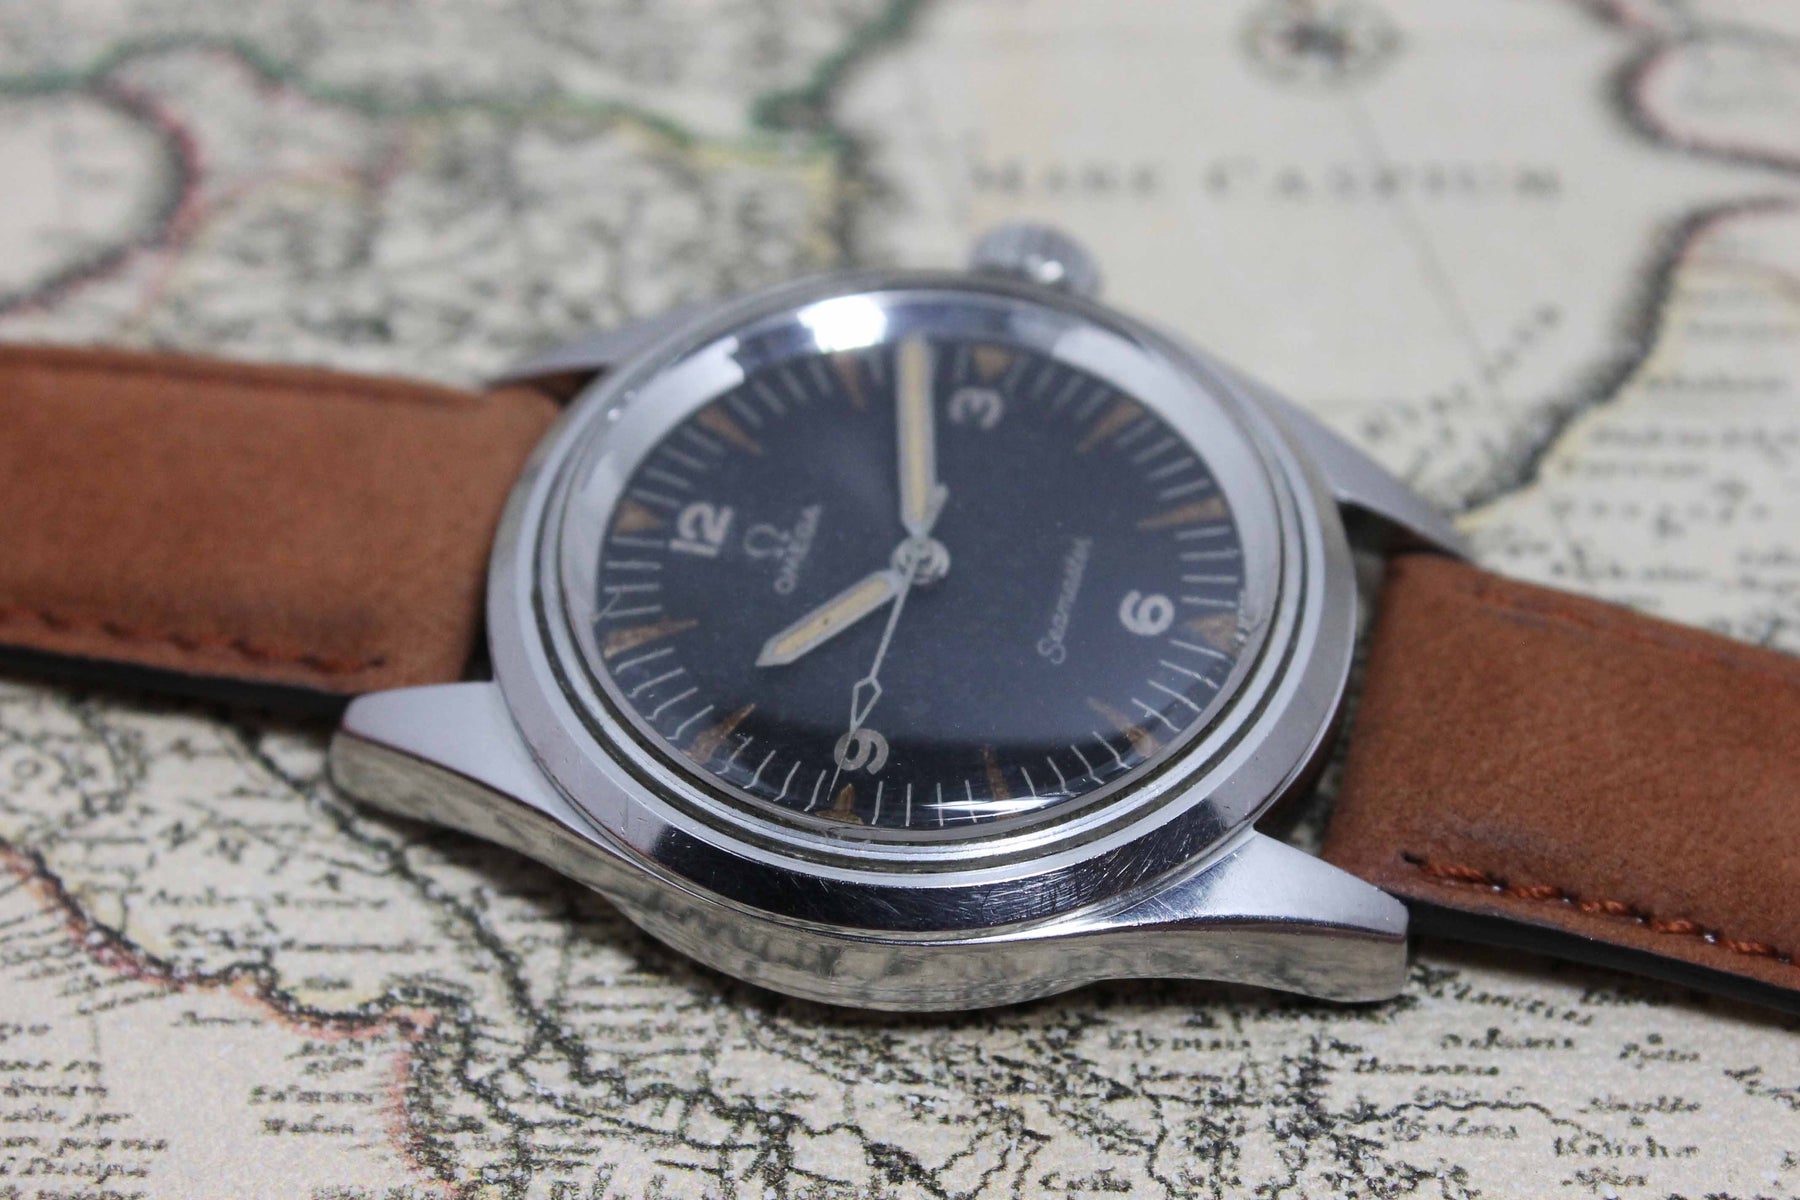 1963 Omega Railmaster Pakistan Air Force Ref. 135.004-63 (with Extract from Archives)